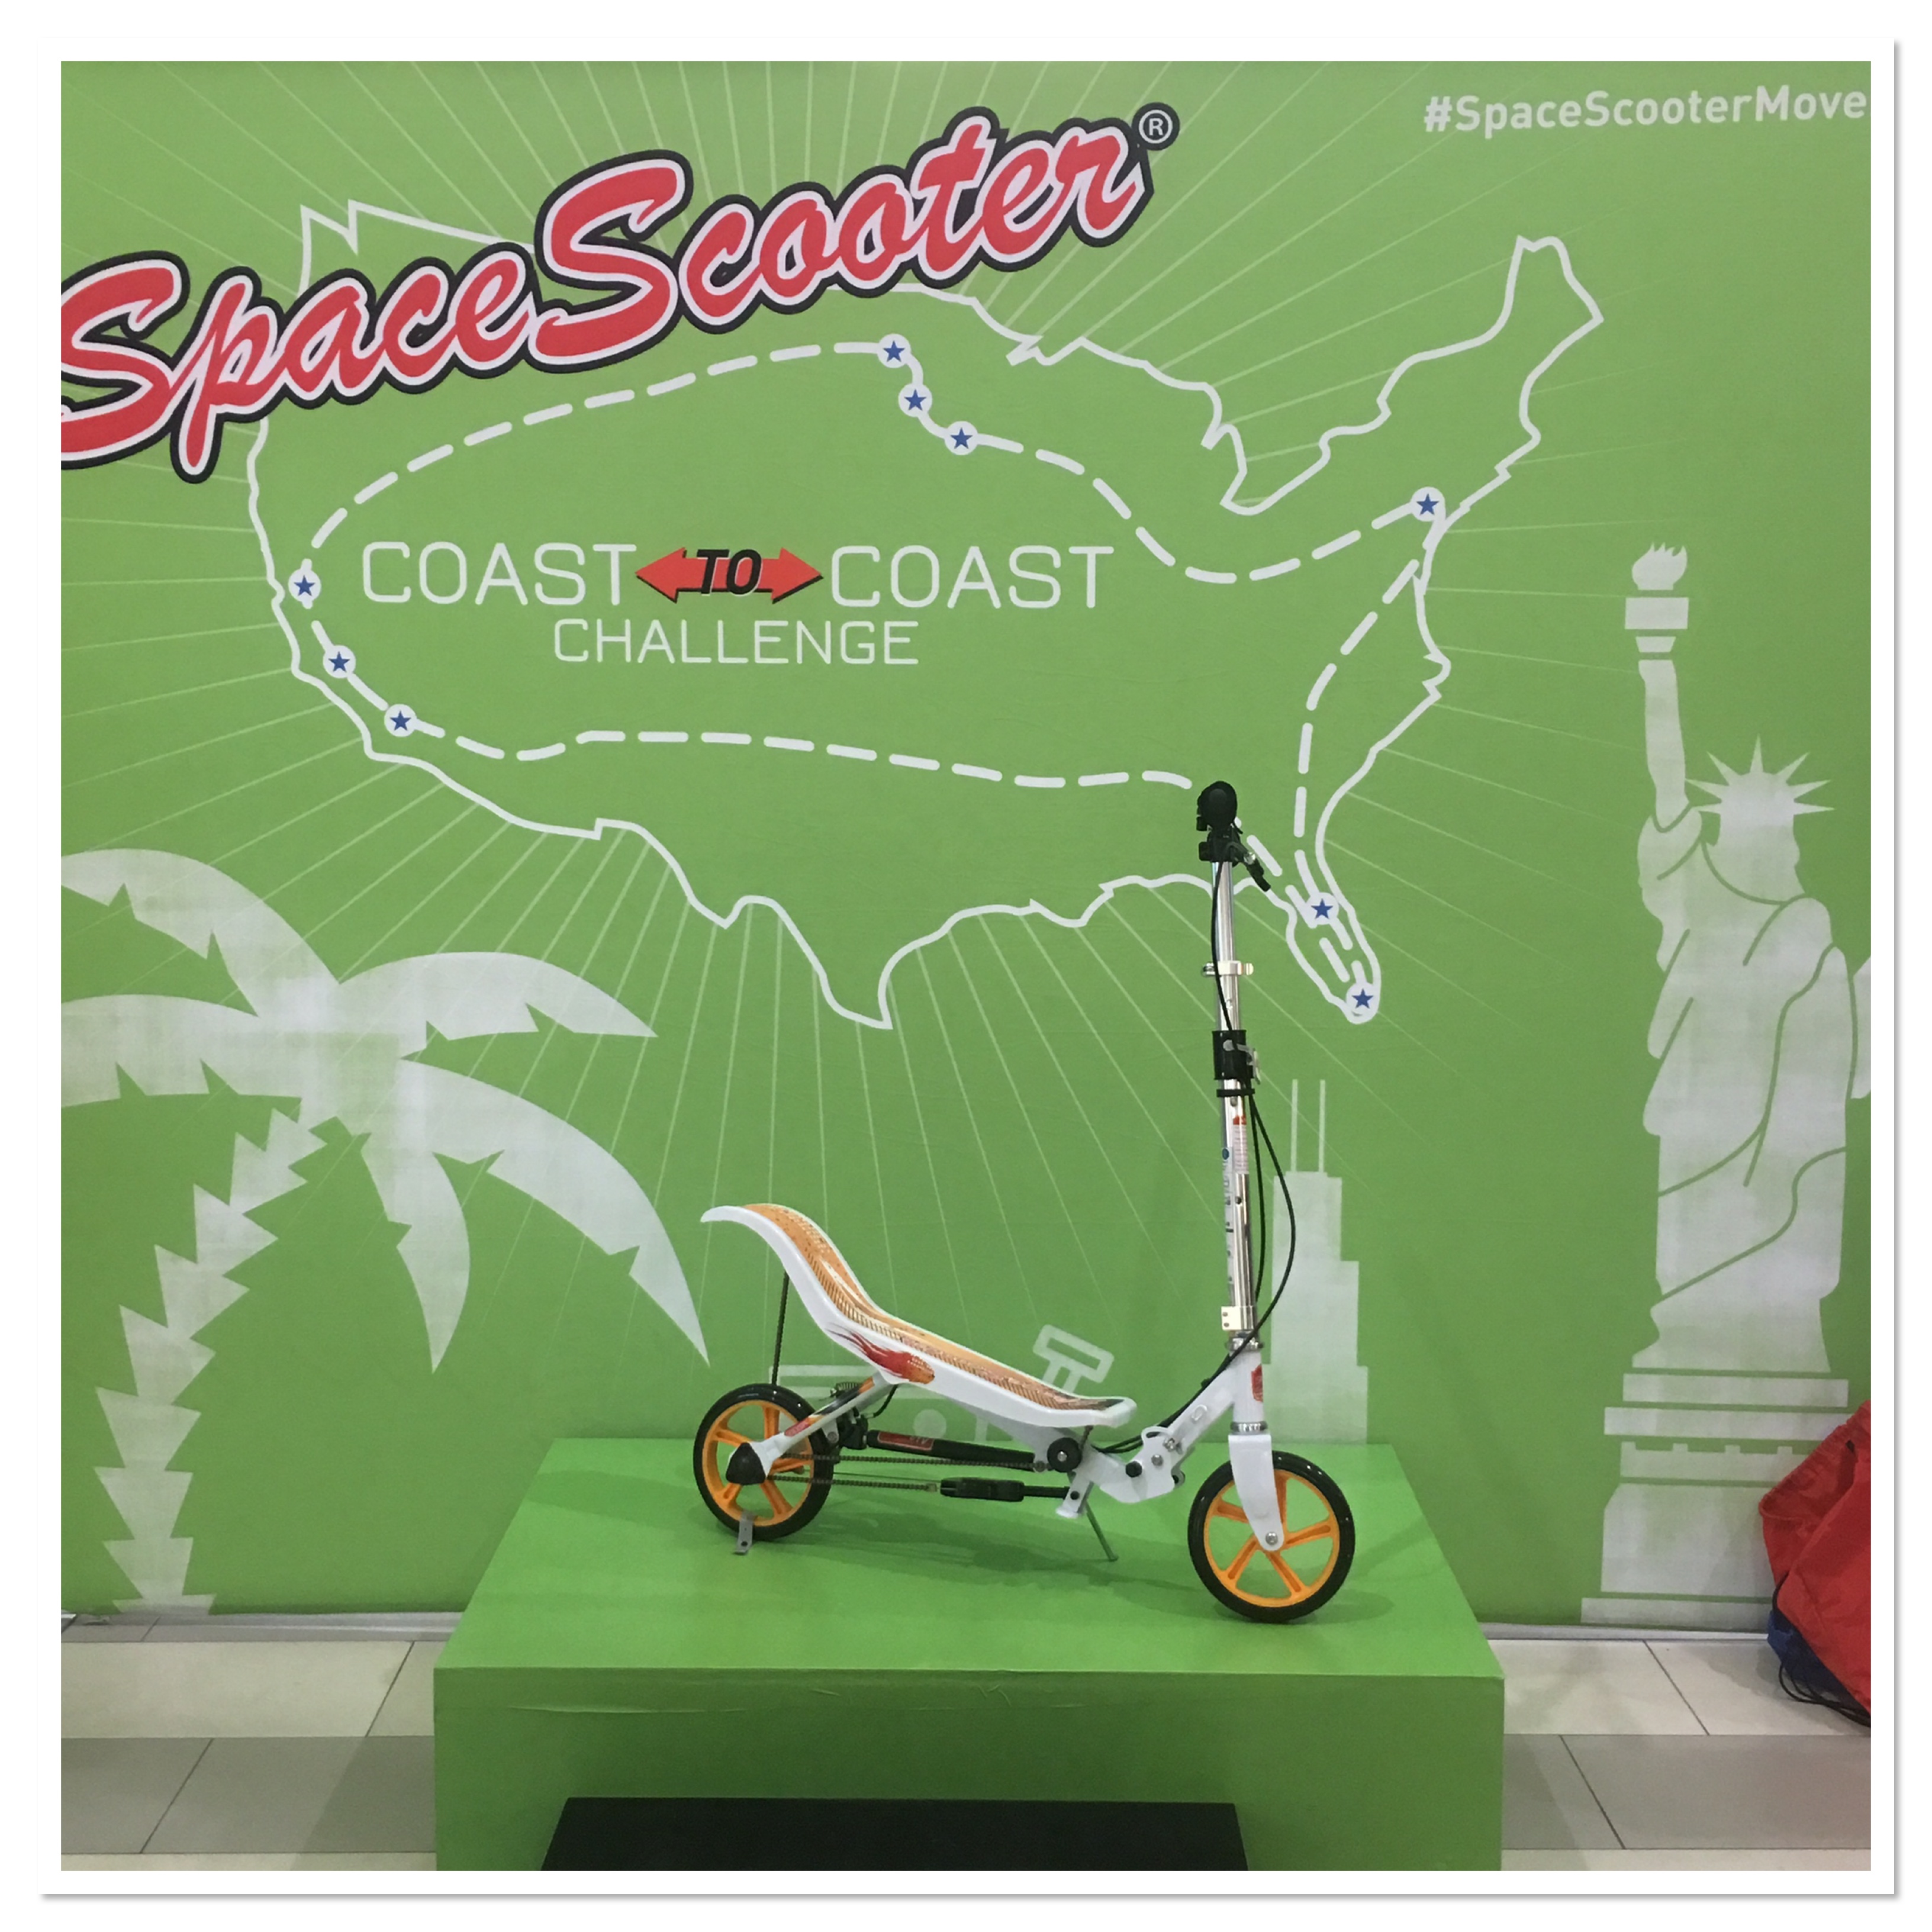 Space Scooter Movement